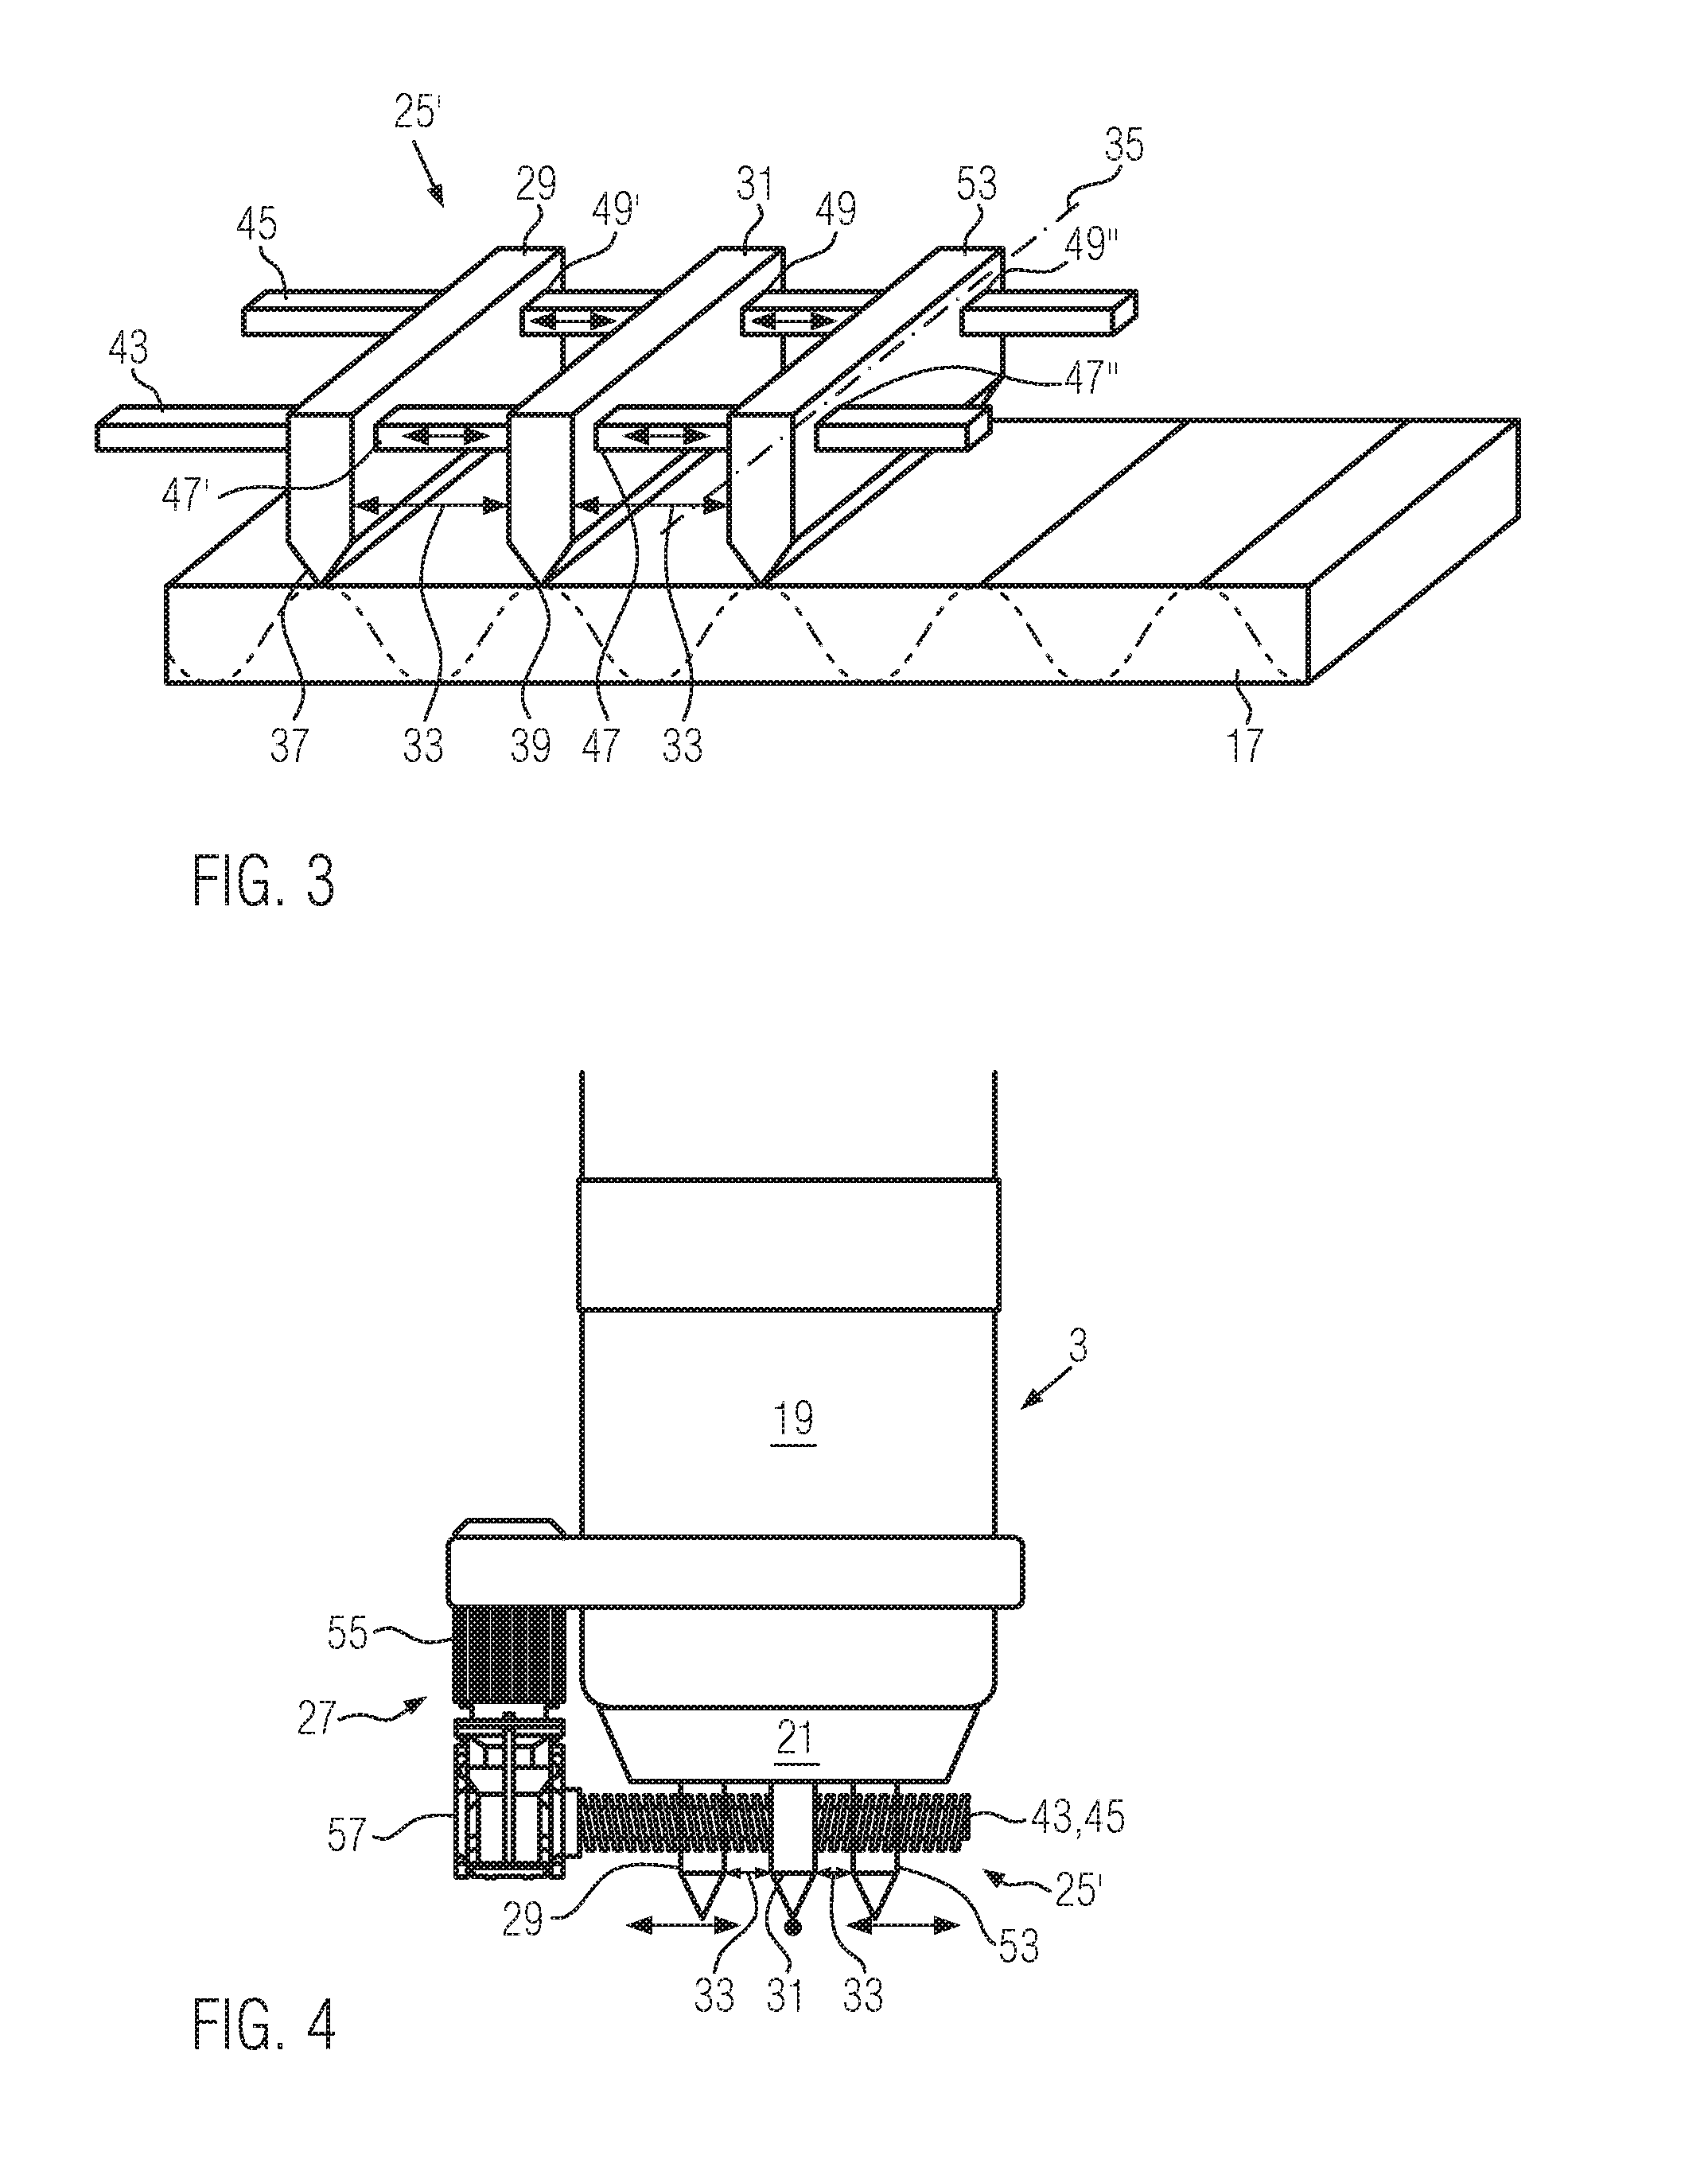 System for non-destructive inspection of structural components